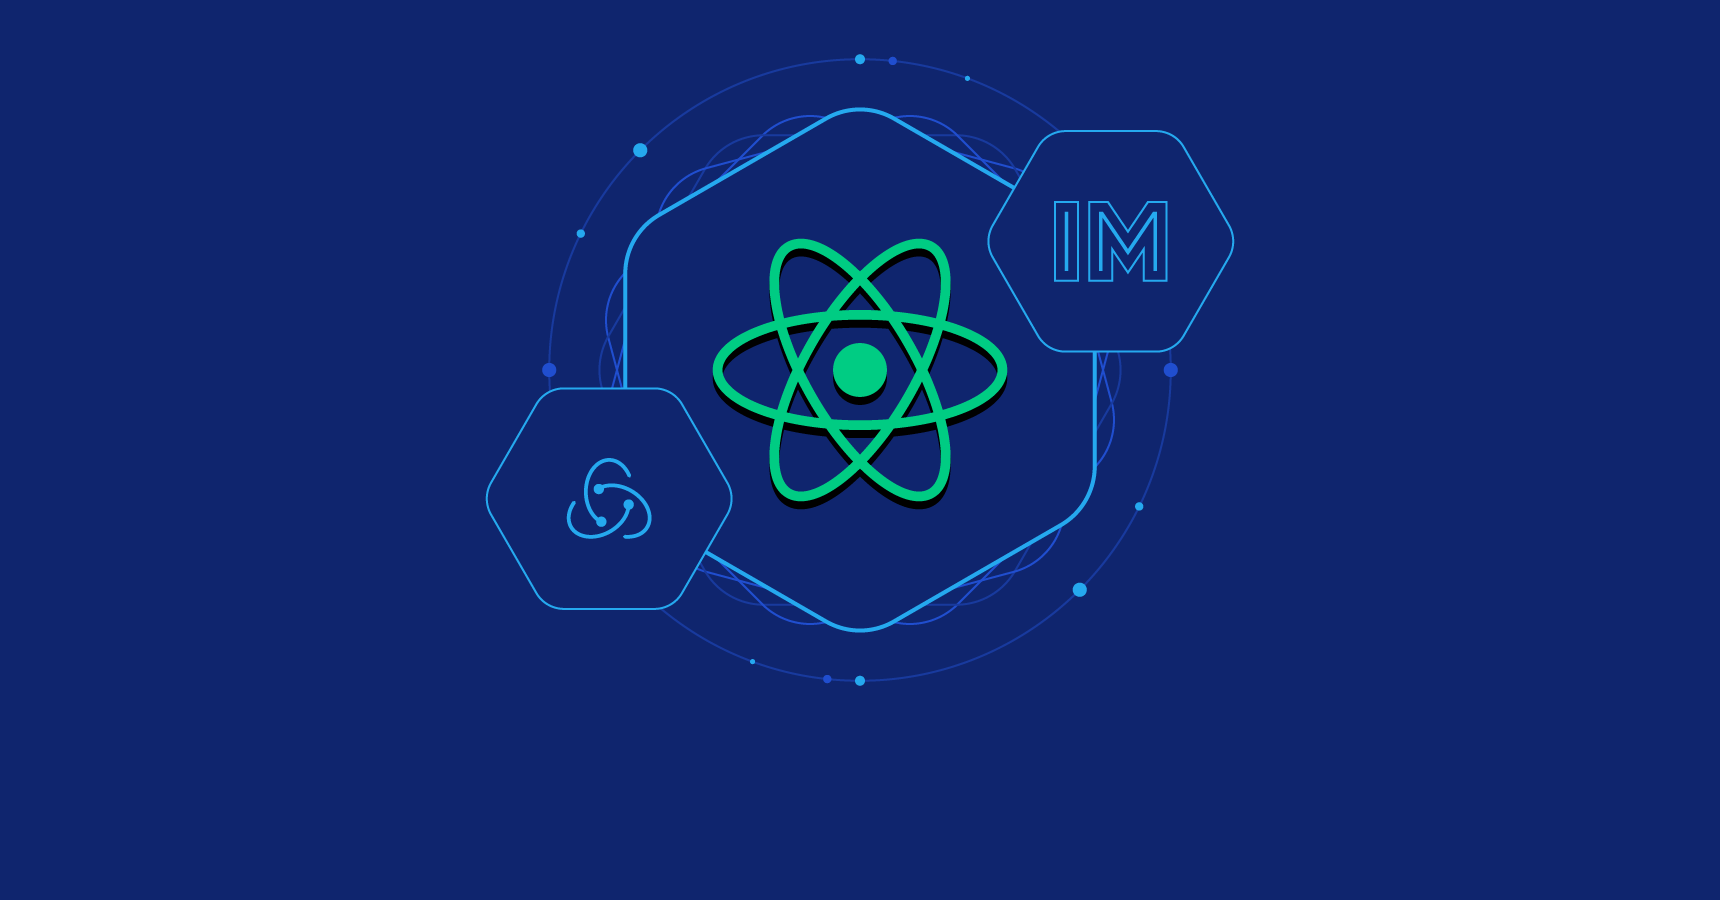 React, Redux, and Immutable.js: Ingredients for Efficient Web Applications